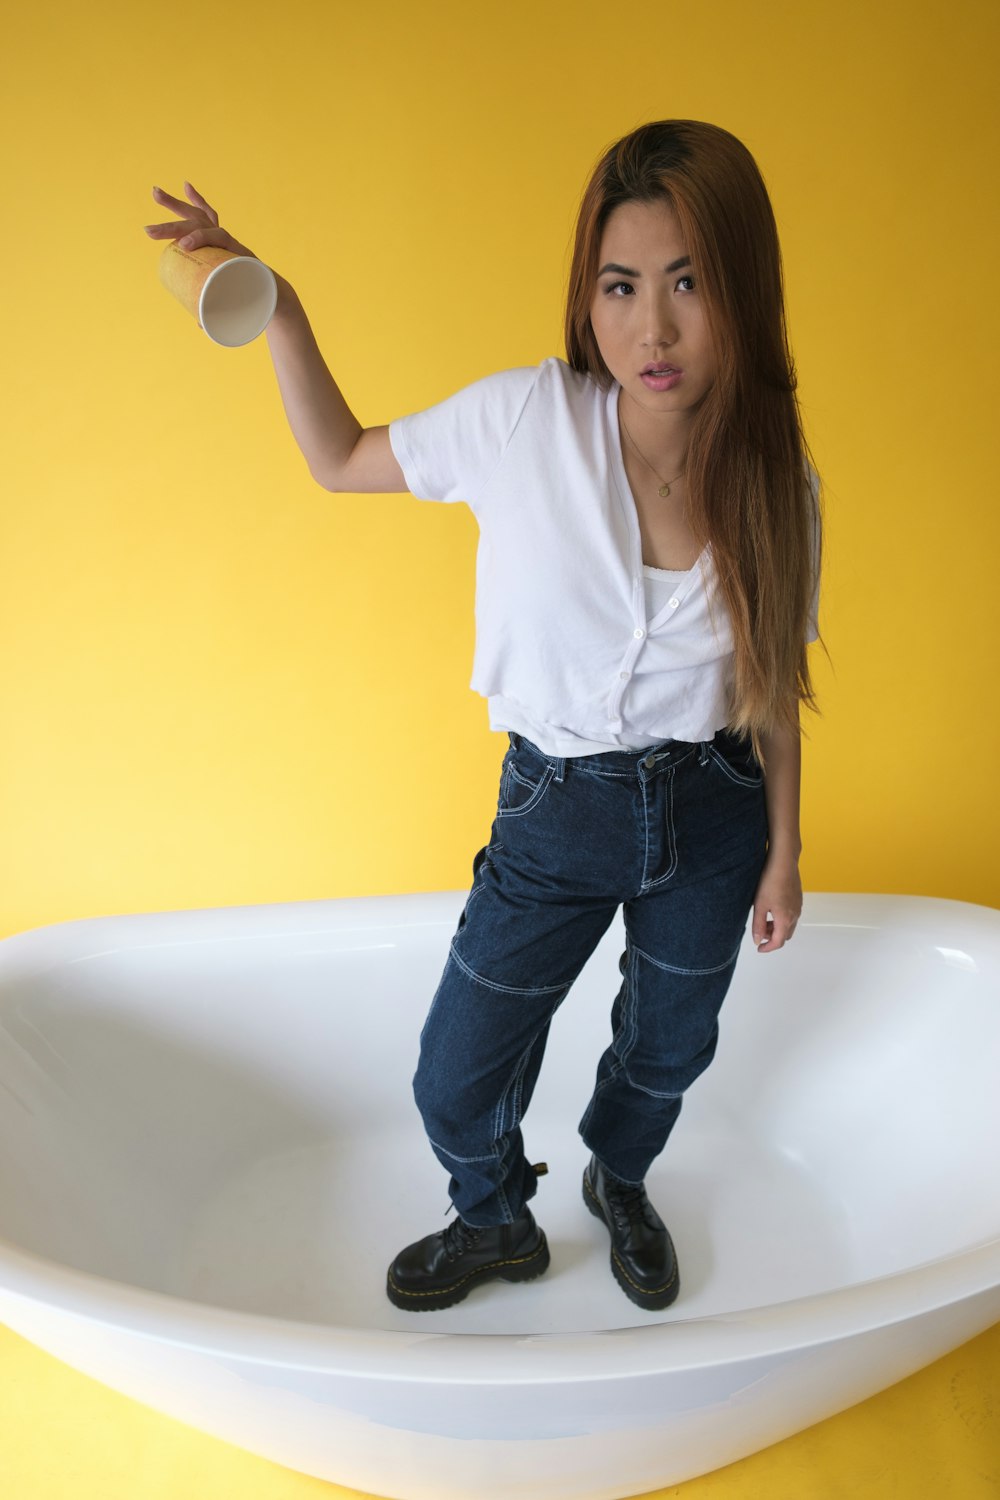 woman in white dress shirt and blue denim jeans standing on bathtub